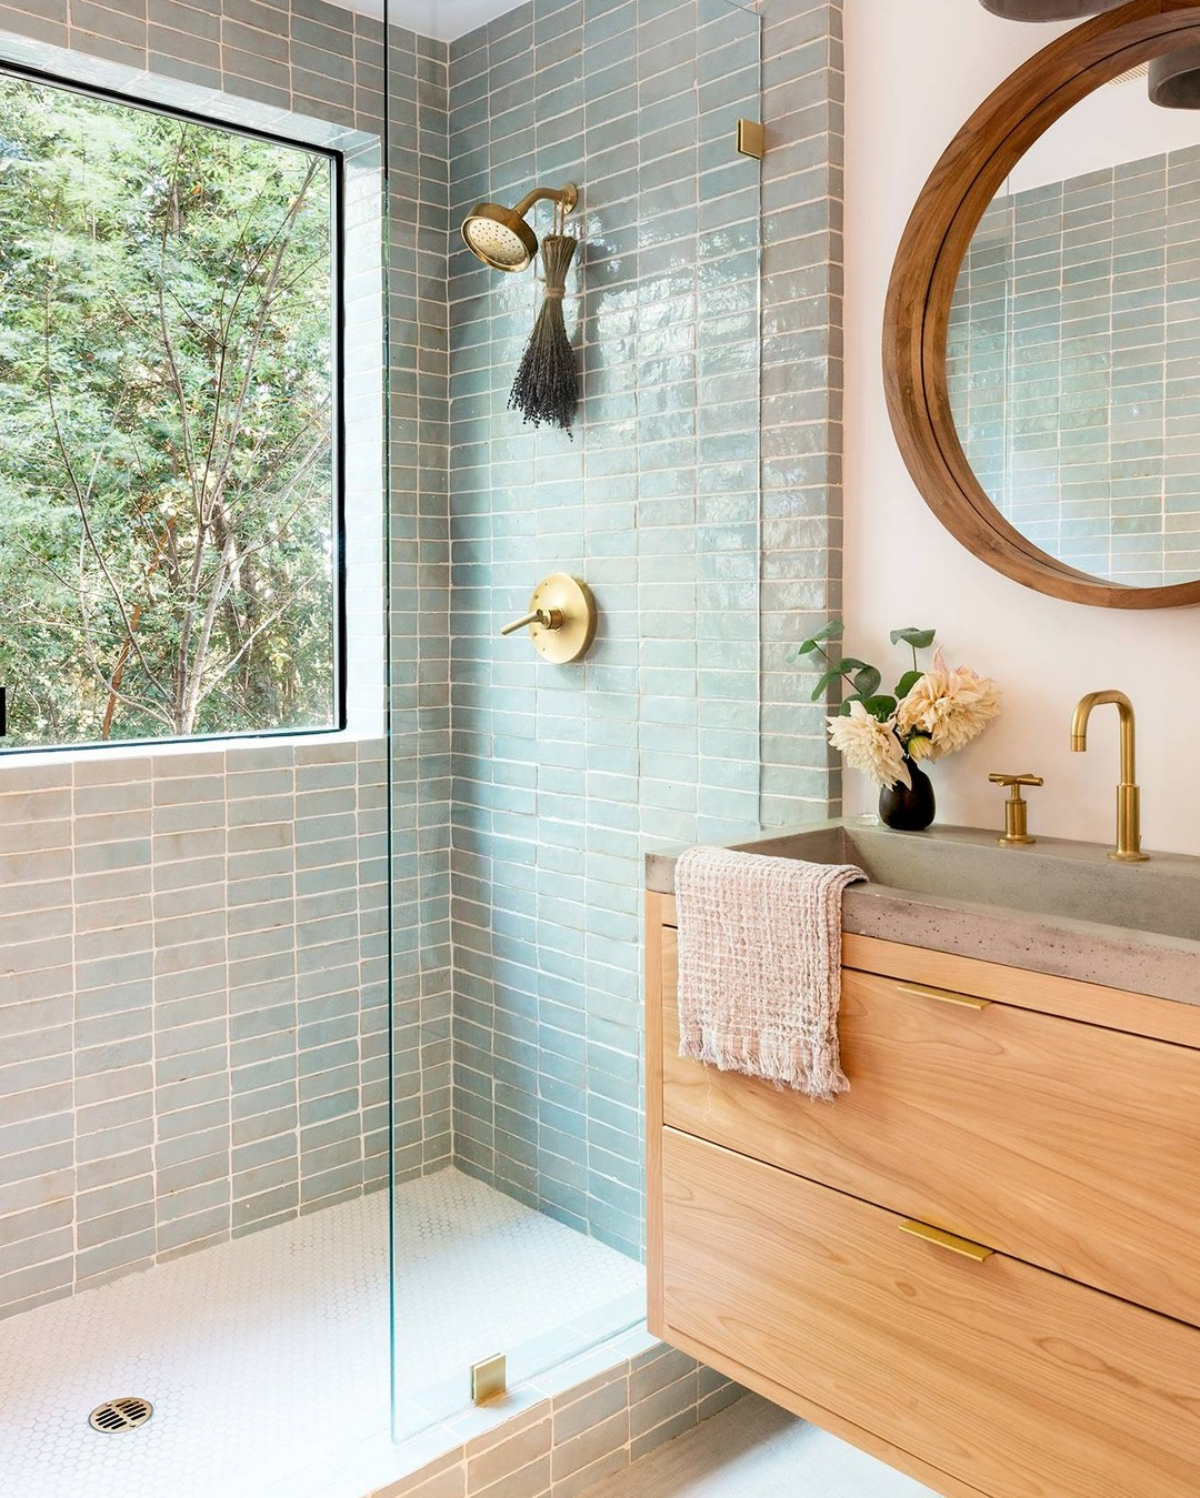 Transforming A Tiny Space: My 10 Favorite Tile Shower Ideas For Small Bathrooms